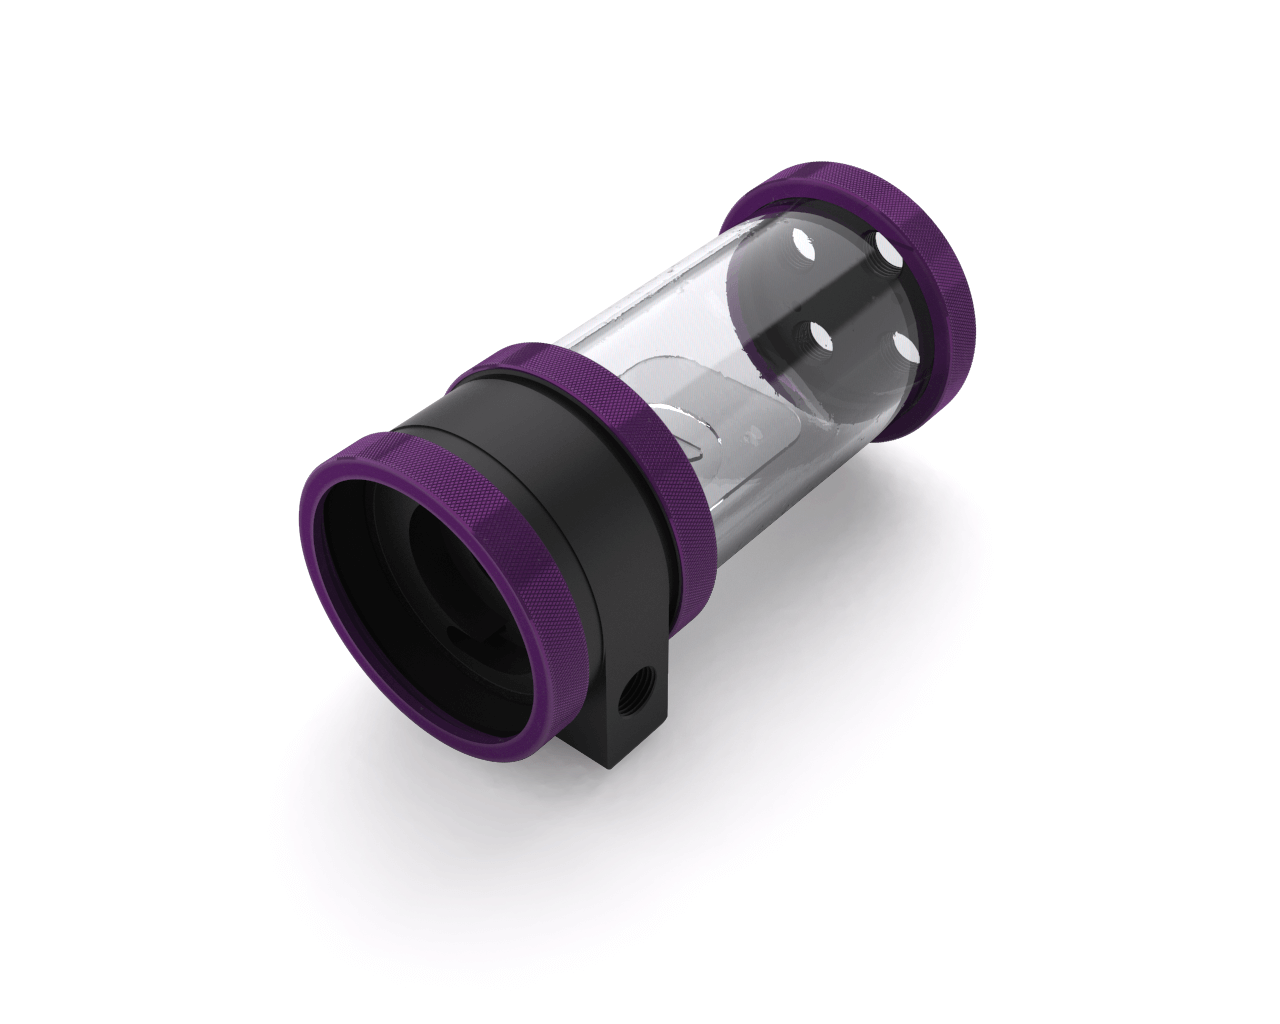 PrimoChill CTR SFF Phase II High Flow D5 Enabled Reservoir System - Black POM - 120mm - PrimoChill - KEEPING IT COOL Candy Purple